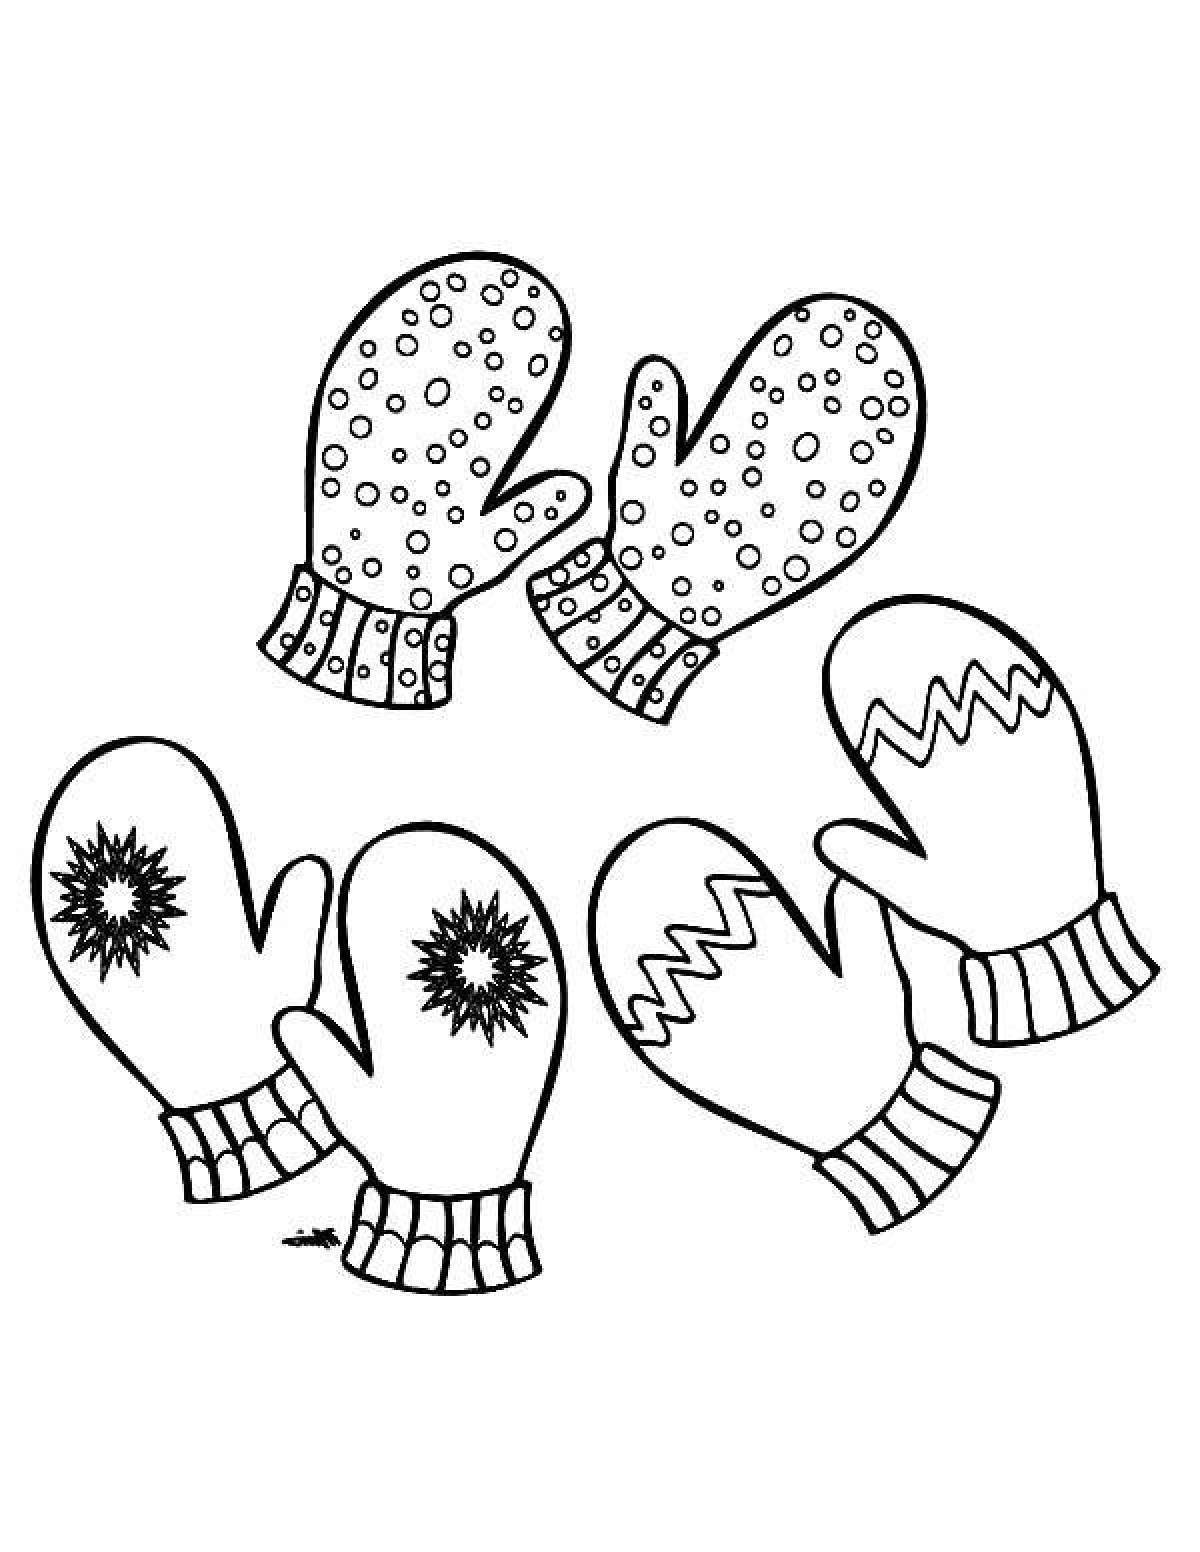 Coloring book bright mitten for children 3-4 years old